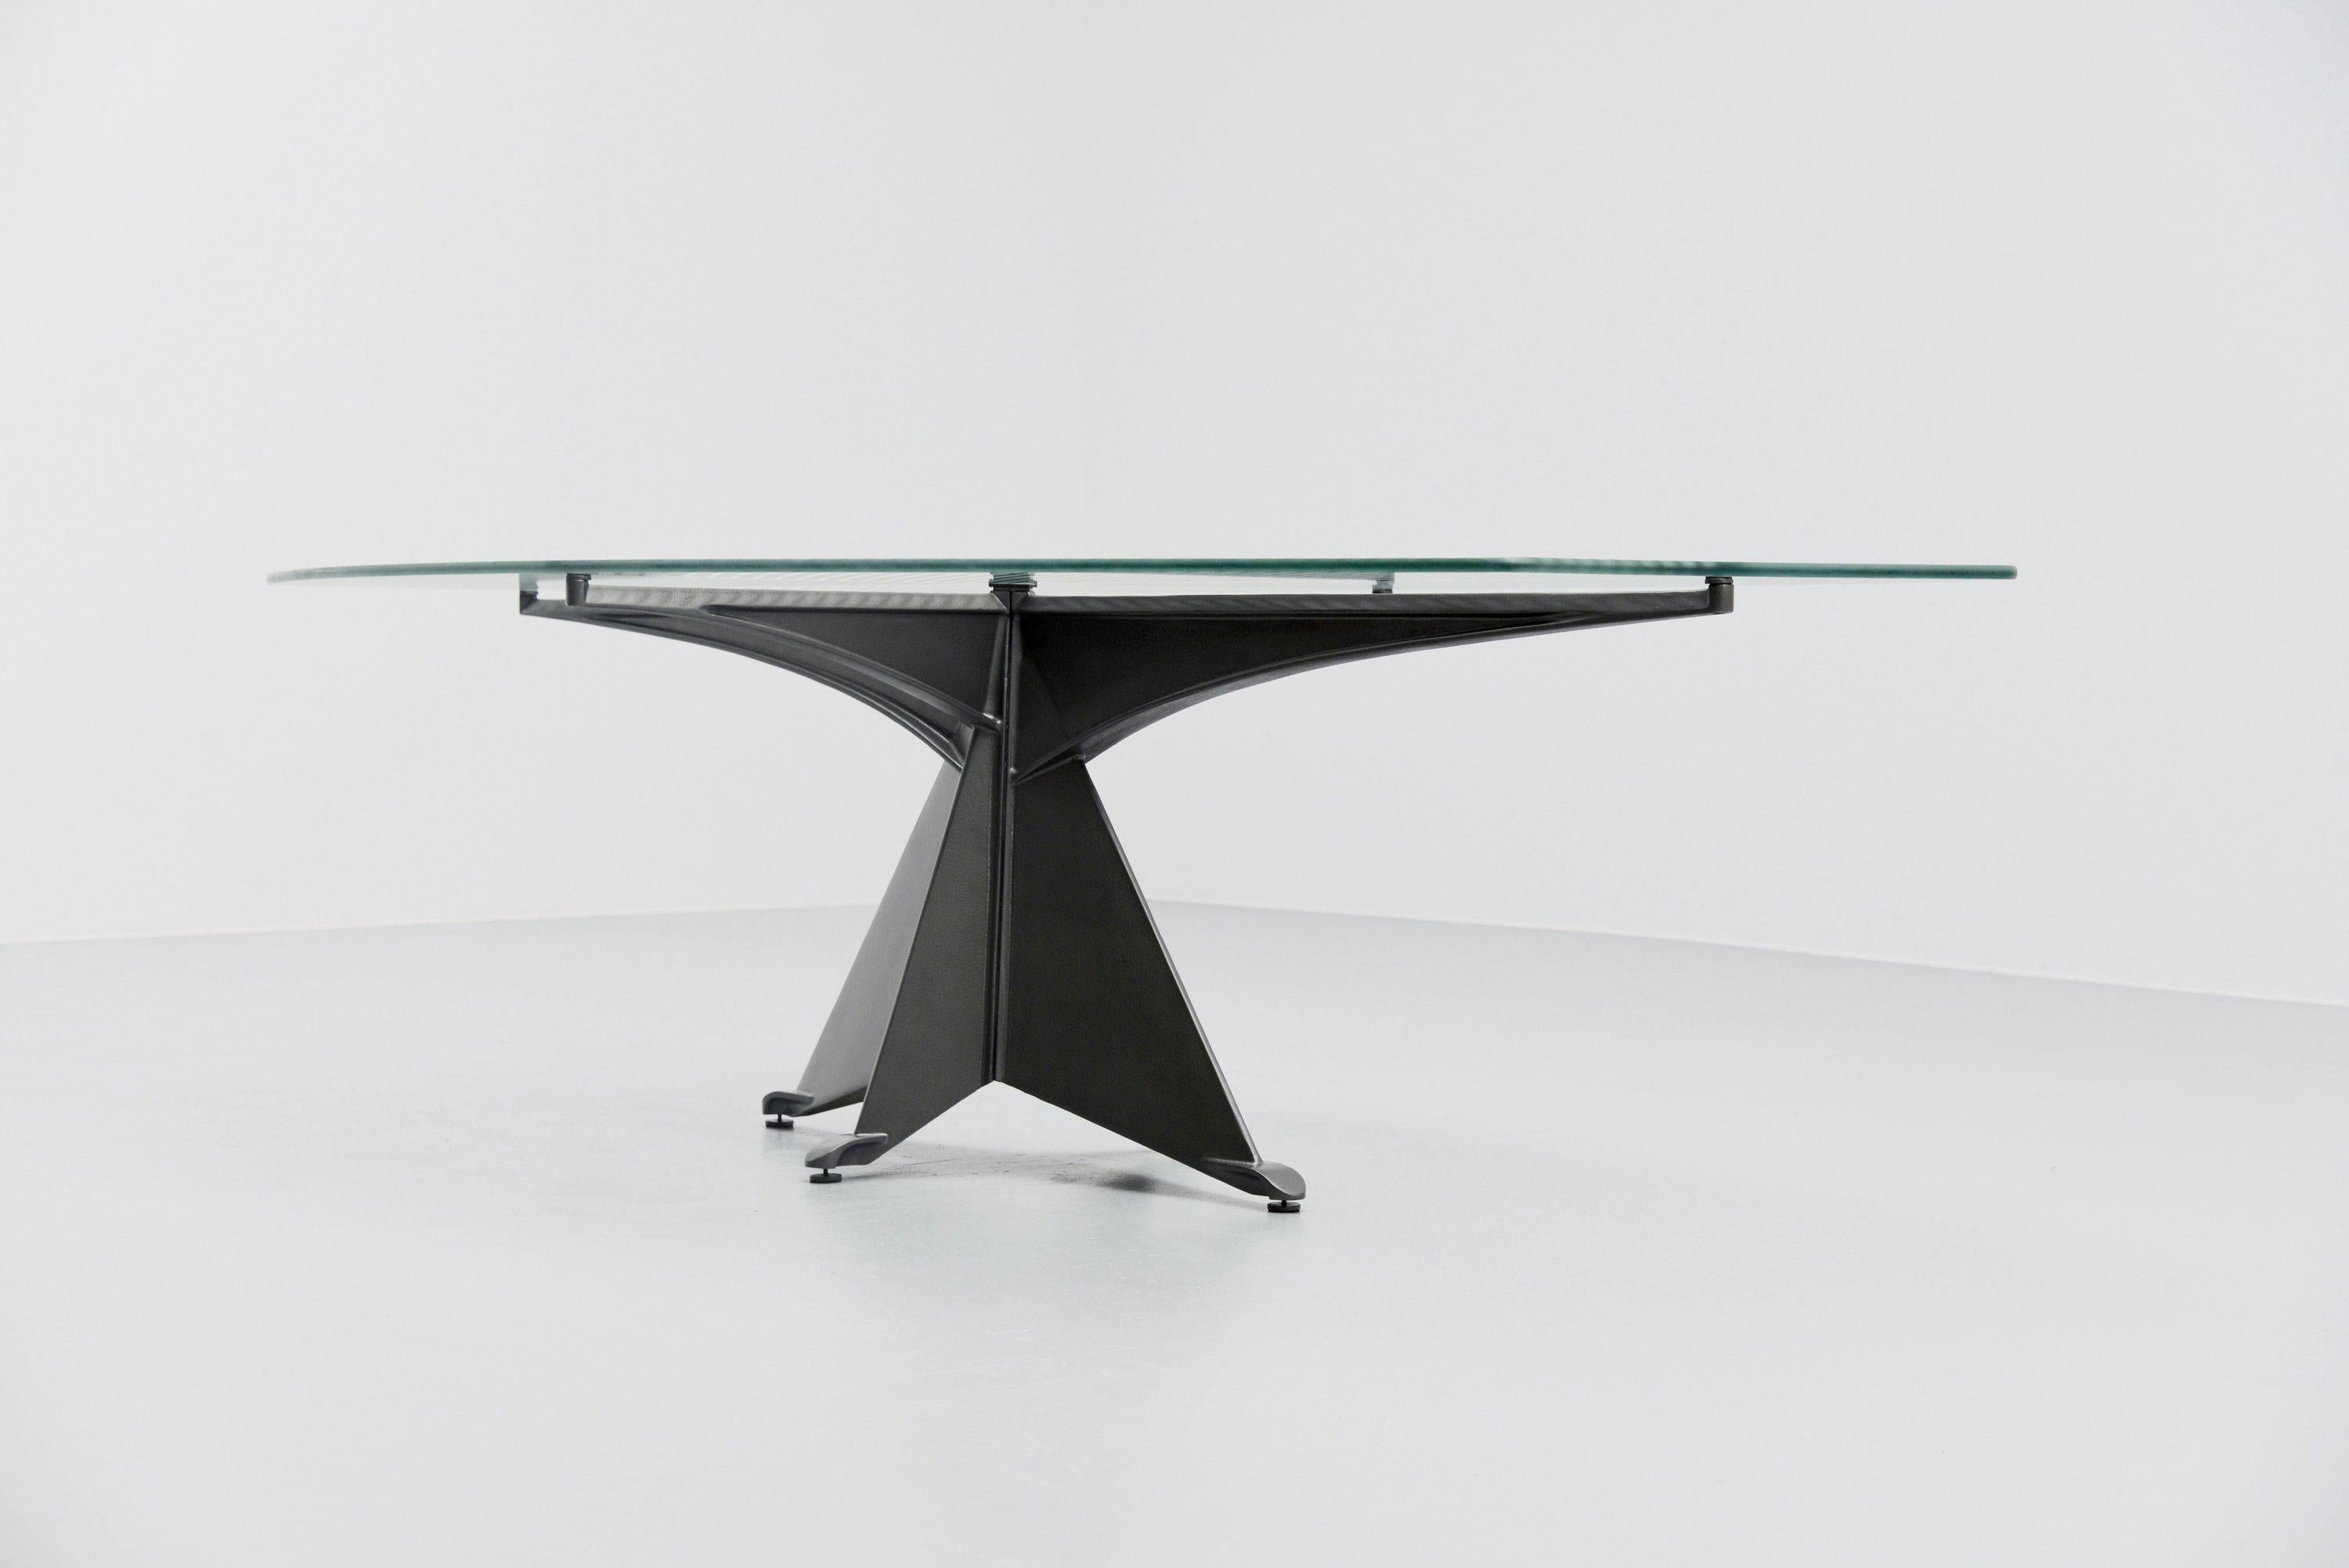 Postmodern so called Alada dining table designed by Oscar Tusquets and manufactured by Casas, Spain 1985. The challenge faced was twofold: to design a table to complement the Varius chair, which had been presented the year before, and to ensure that